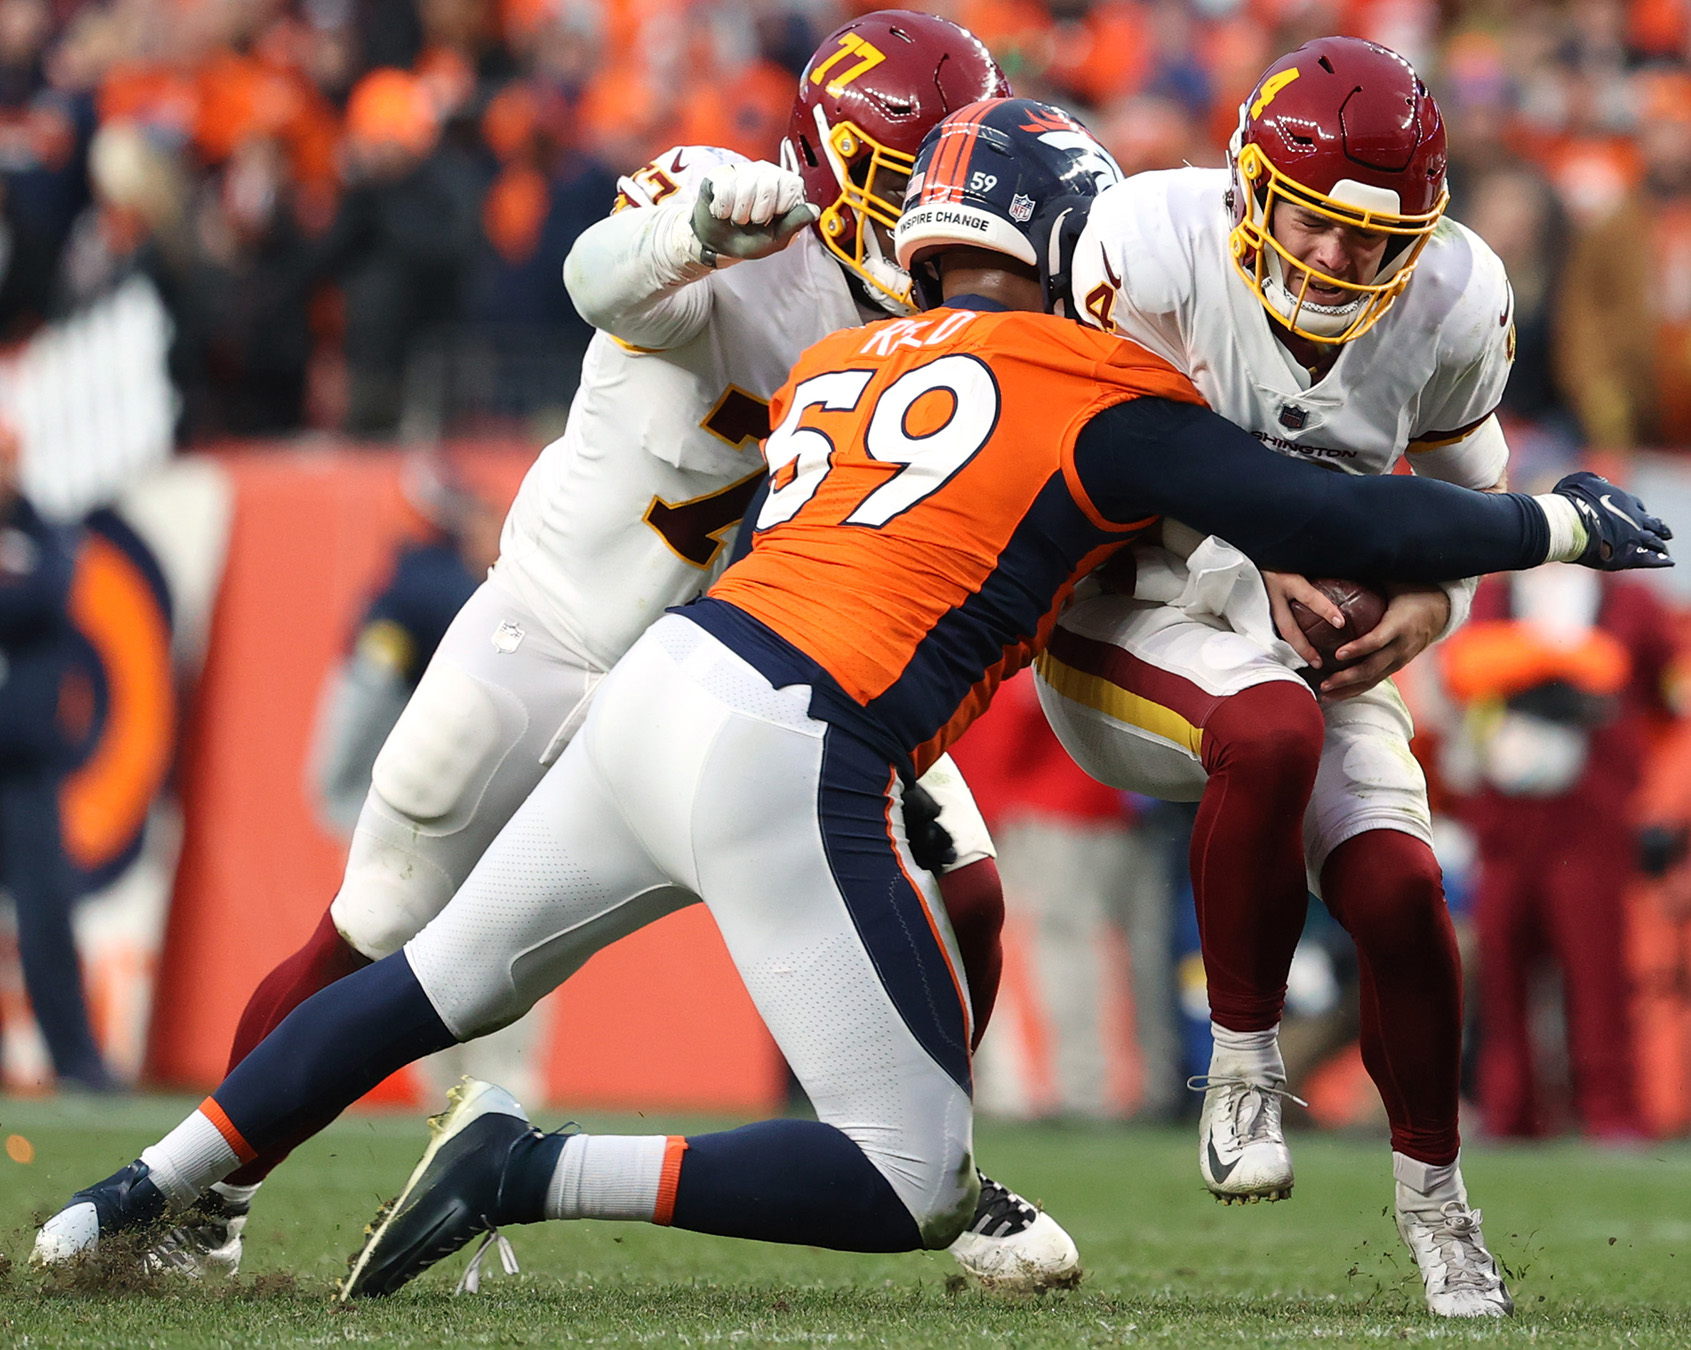 Malik Reed of the Denver Broncos sacks Taylor Heinicke of the Washington Football Team in the fourth quarter at Empower Field At Mile High on Oct. 31, 2021.